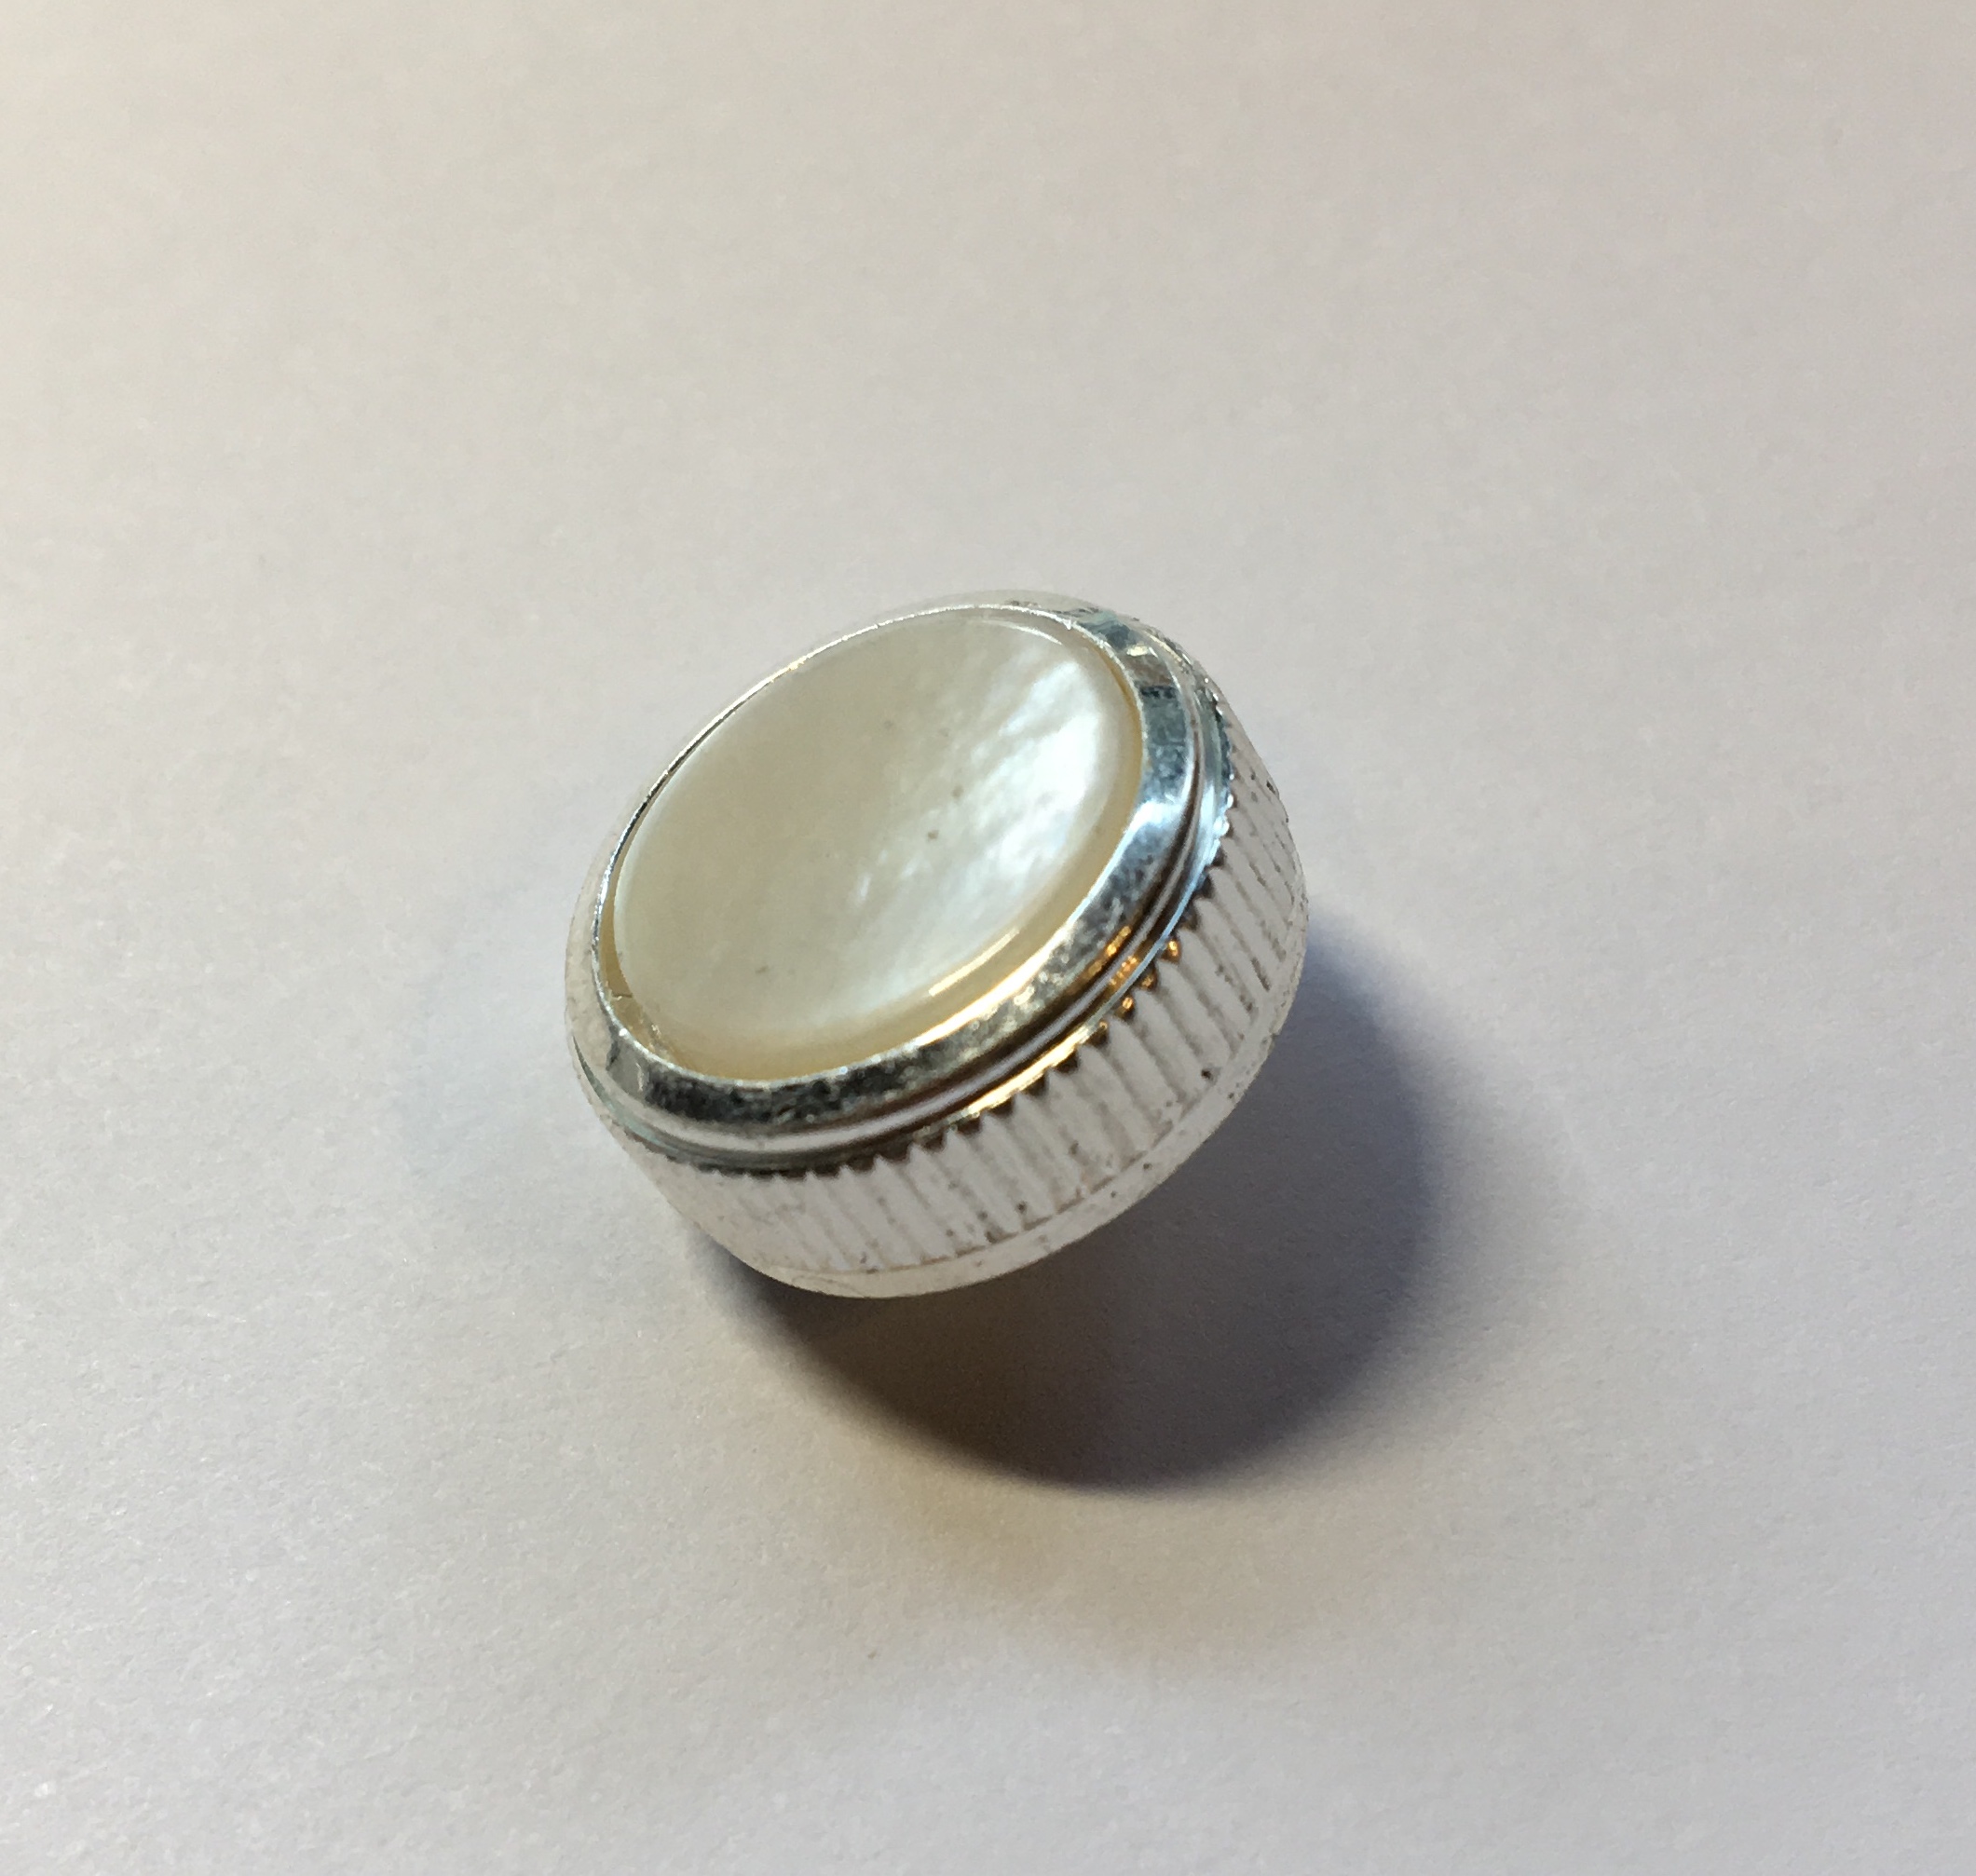 Besson Baritone 955 silver plated valve button top - sold as sets of ONE